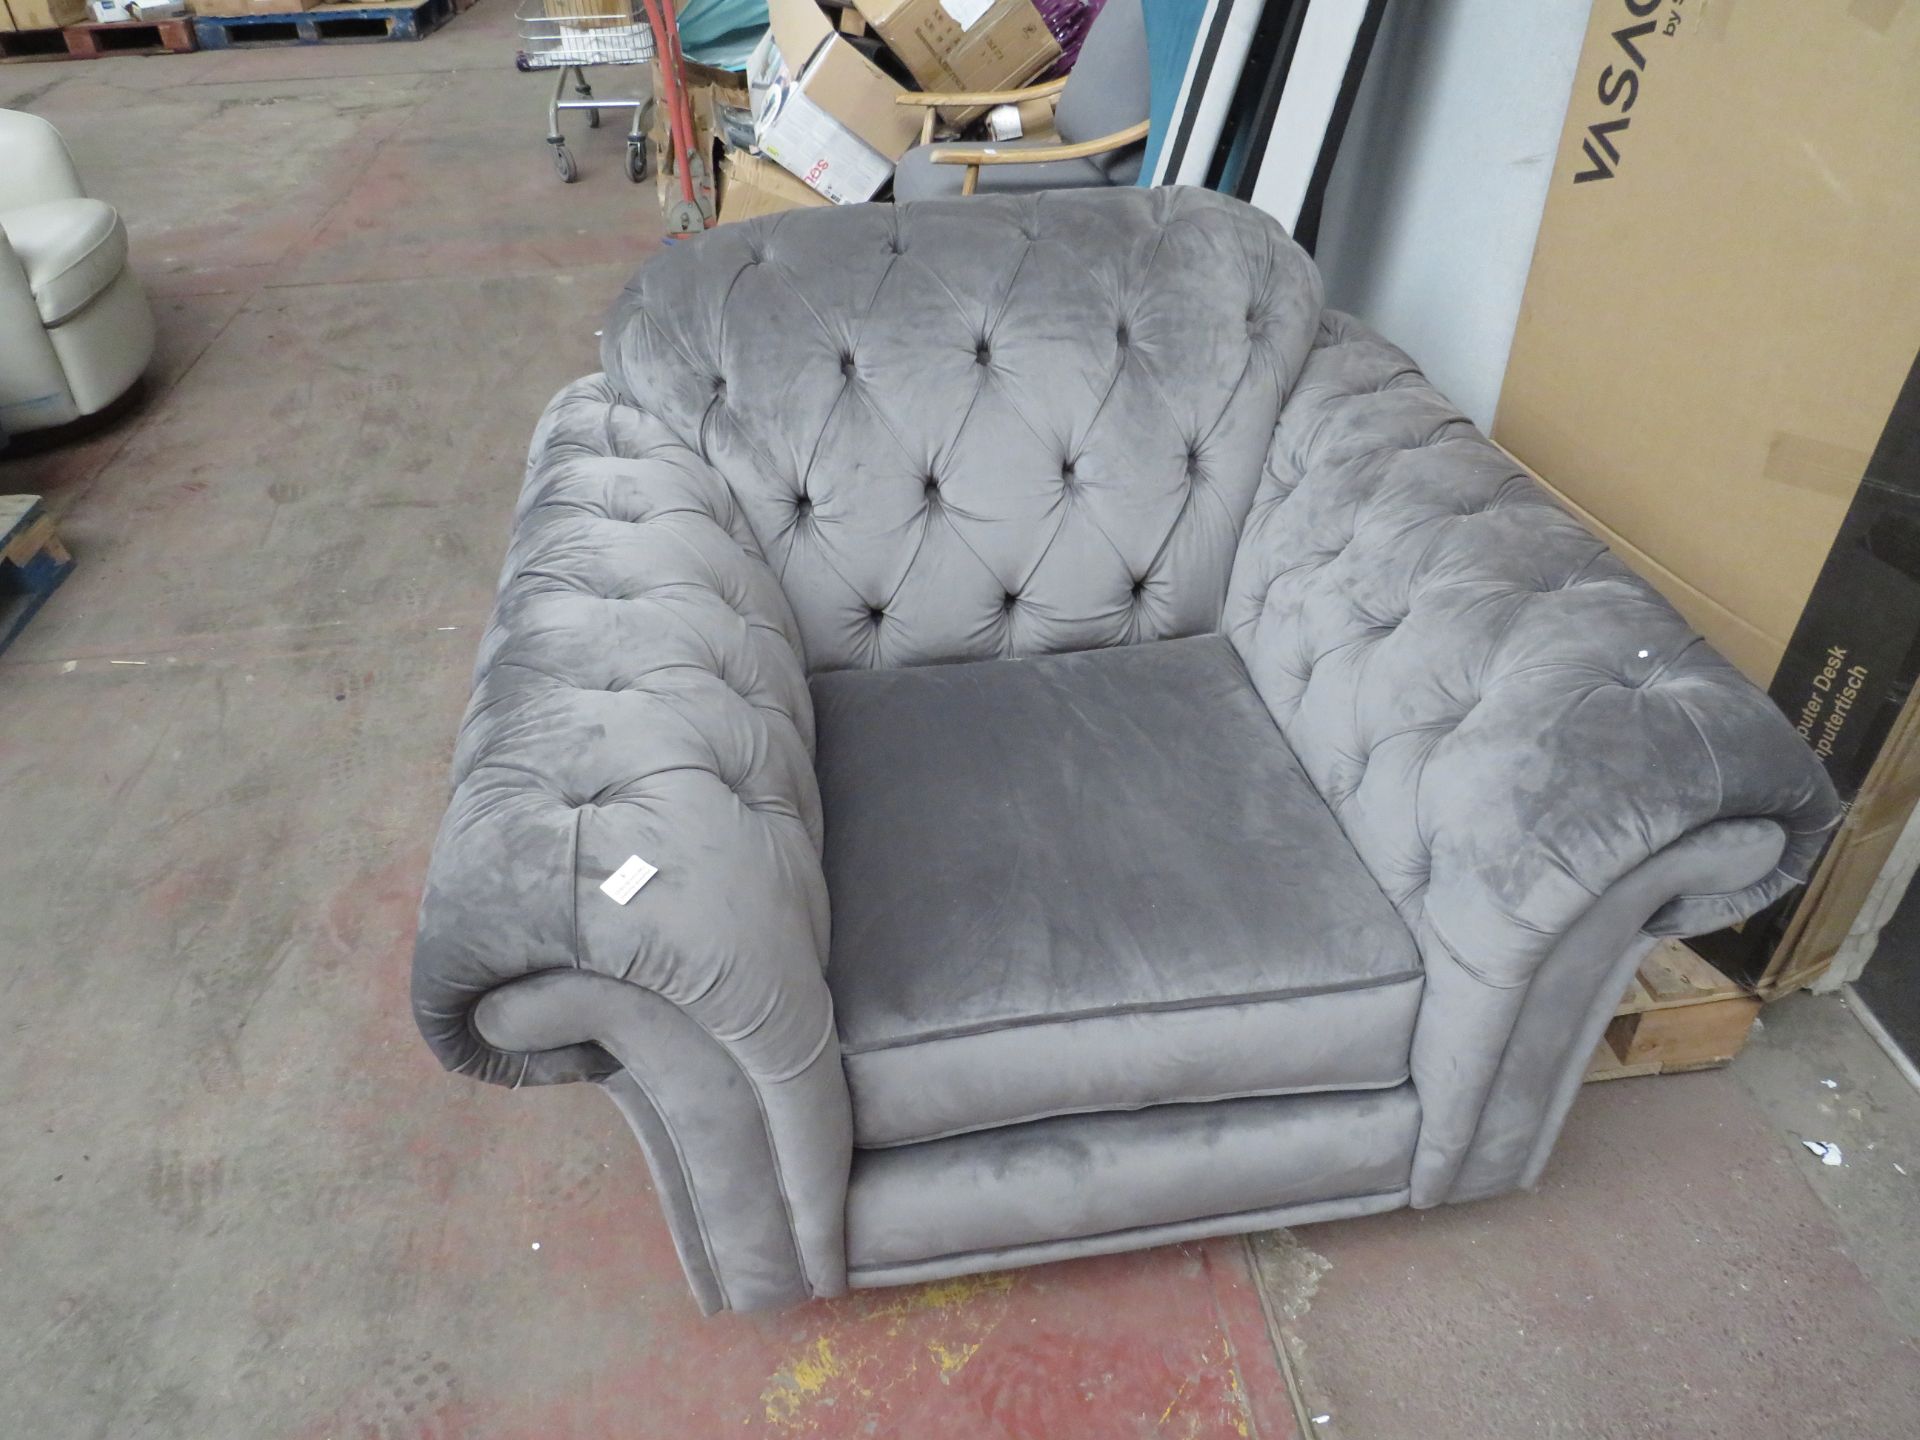 Costco velvet buttoned armchair, no major damage (PLEASE NOTE, THIS DOES NOT PROVIDE ANY WARRANTY OR